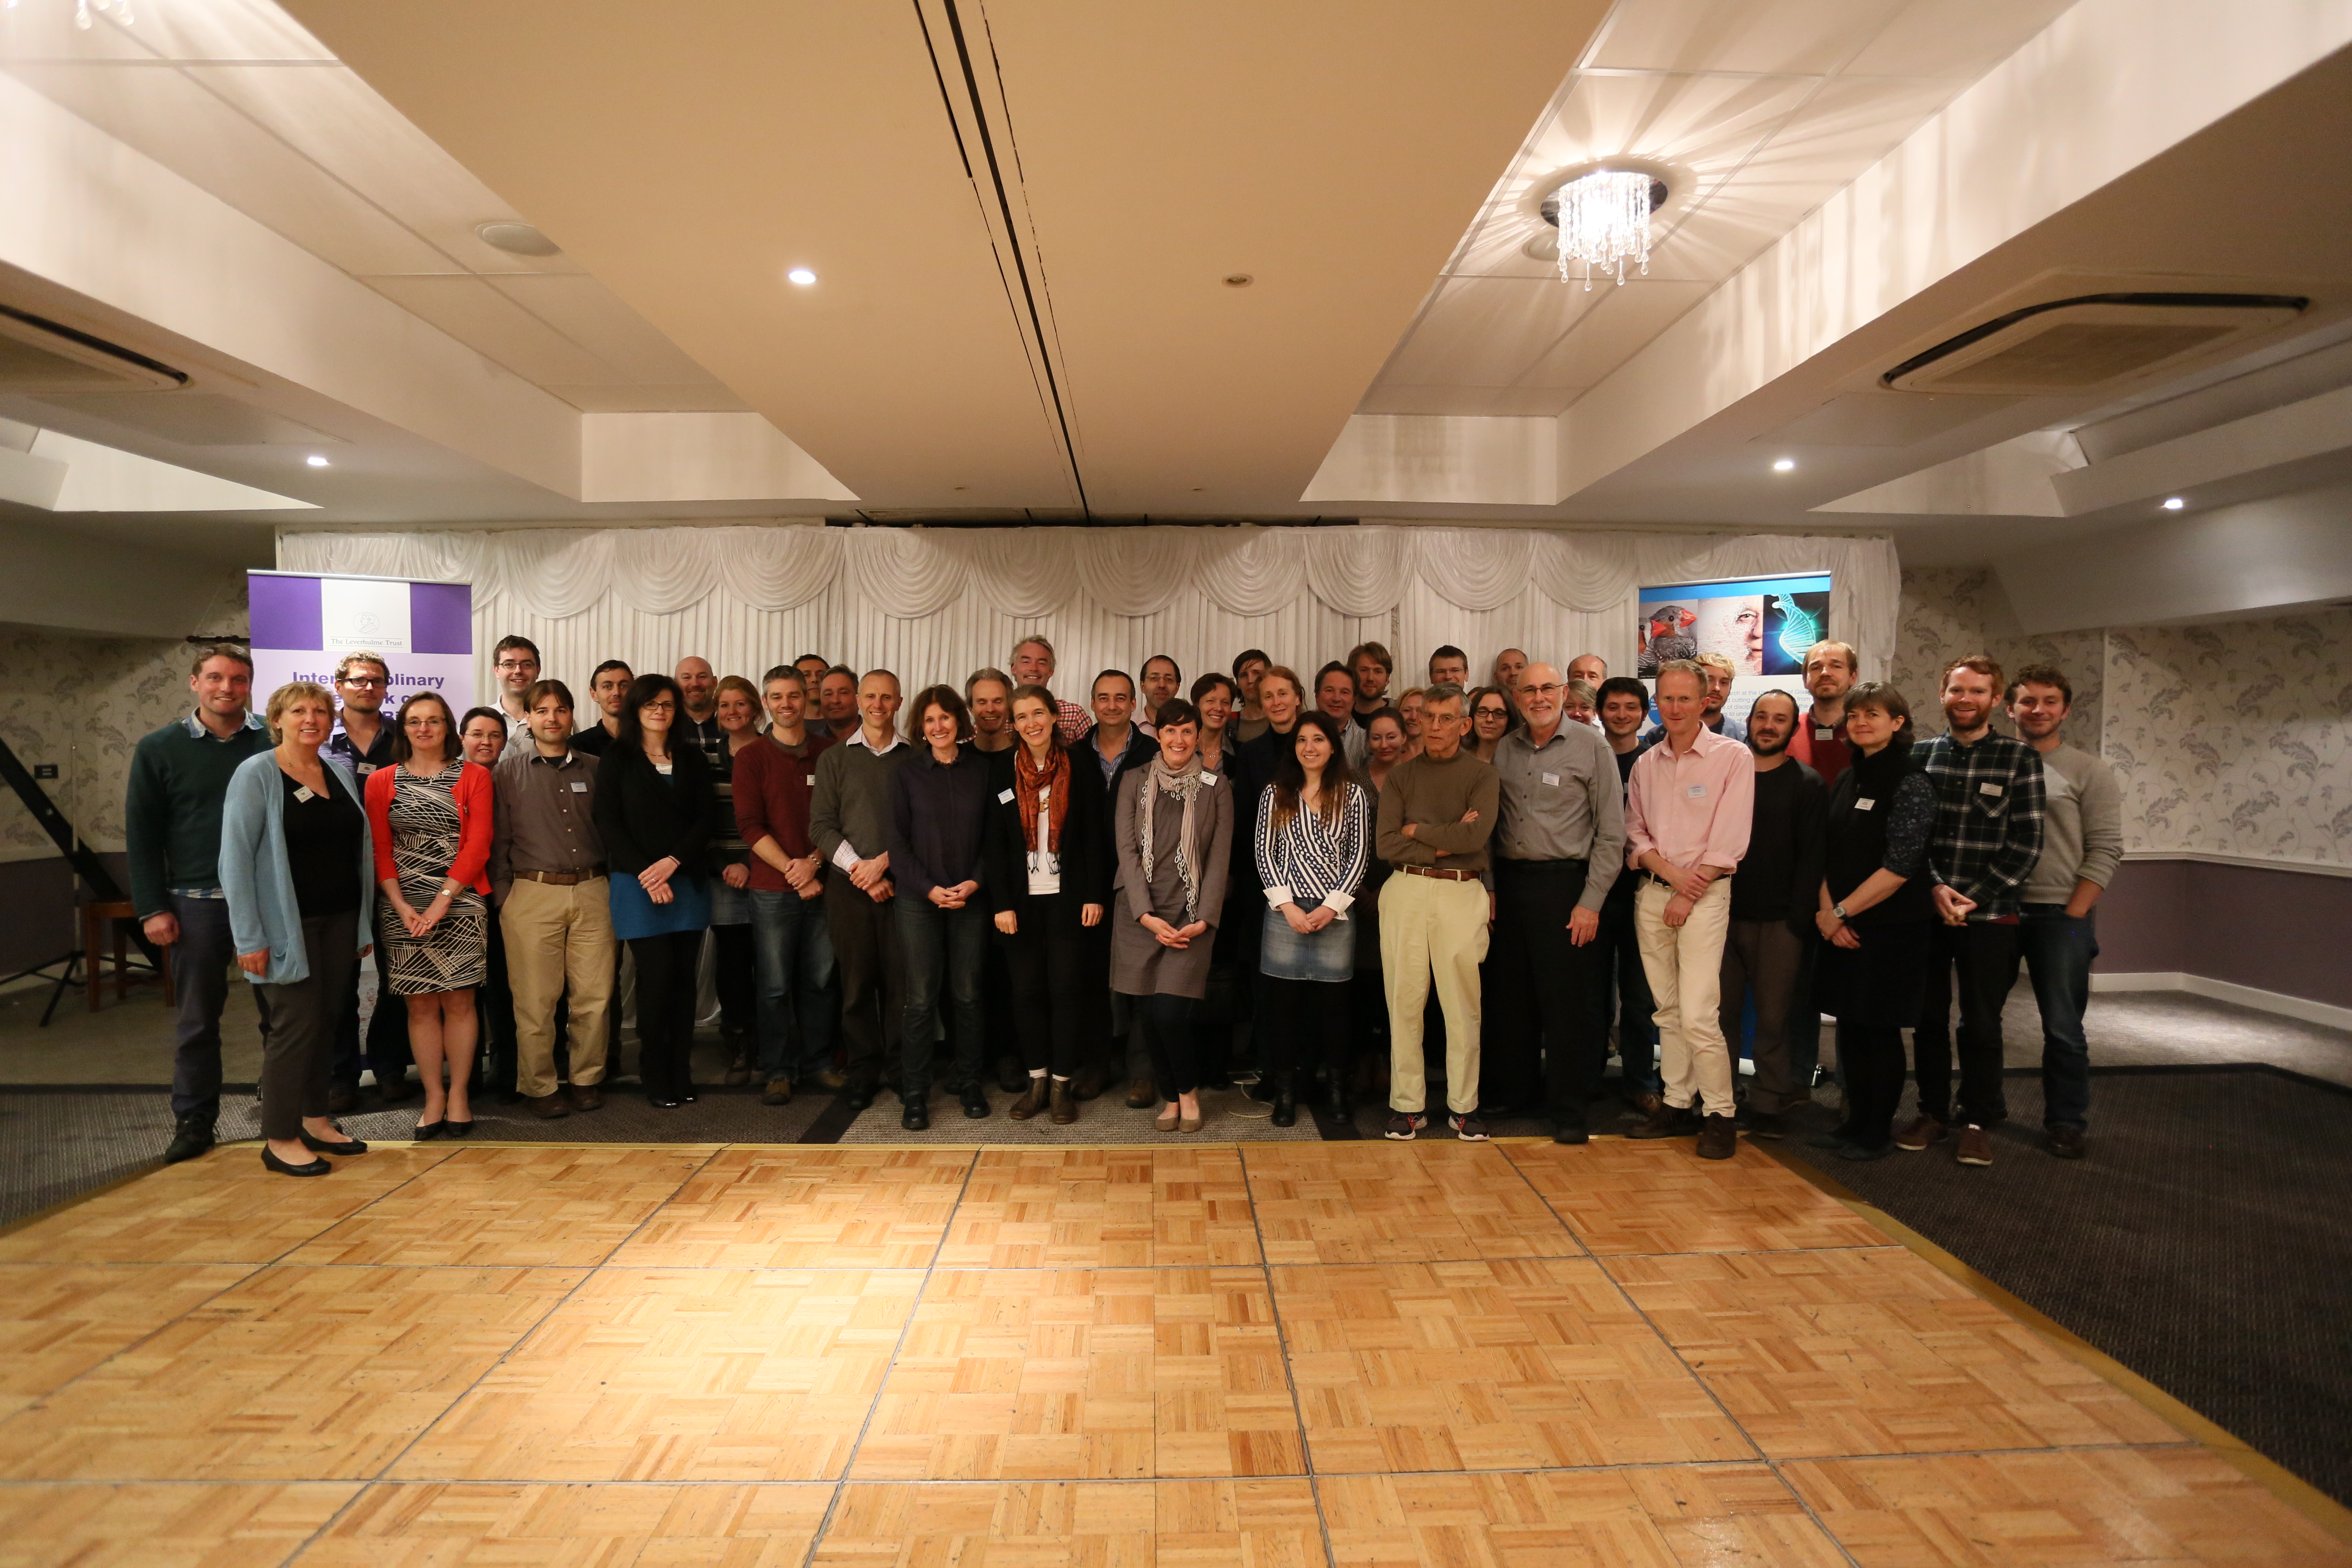 All delegates of the 2014 Telomere Dynamics Workshop in Drymen, Scotland.